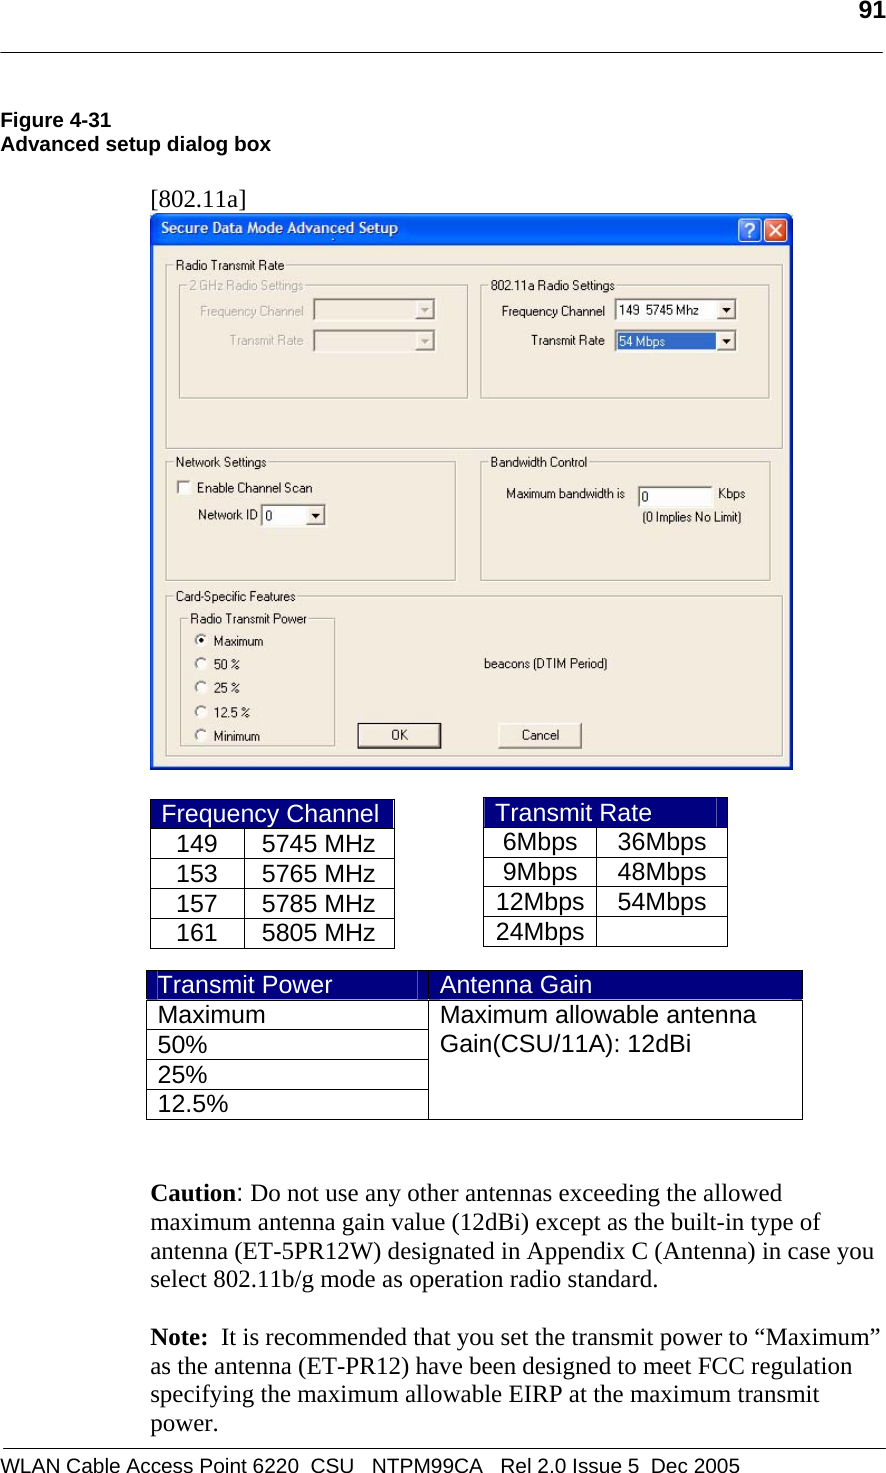   91  WLAN Cable Access Point 6220  CSU   NTPM99CA   Rel 2.0 Issue 5  Dec 2005 Figure 4-31 Advanced setup dialog box  [802.11a]   Frequency Channel149 5745 MHz153 5765 MHz157 5785 MHz161 5805 MHz        Caution: Do not use any other antennas exceeding the allowed maximum antenna gain value (12dBi) except as the built-in type of antenna (ET-5PR12W) designated in Appendix C (Antenna) in case you select 802.11b/g mode as operation radio standard.  Note:  It is recommended that you set the transmit power to “Maximum” as the antenna (ET-PR12) have been designed to meet FCC regulation specifying the maximum allowable EIRP at the maximum transmit power.  Transmit Rate 6Mbps 36Mbps 9Mbps 48Mbps 12Mbps 54Mbps 24Mbps  Transmit Power  Antenna Gain Maximum 50% 25% 12.5% Maximum allowable antenna  Gain(CSU/11A): 12dBi   